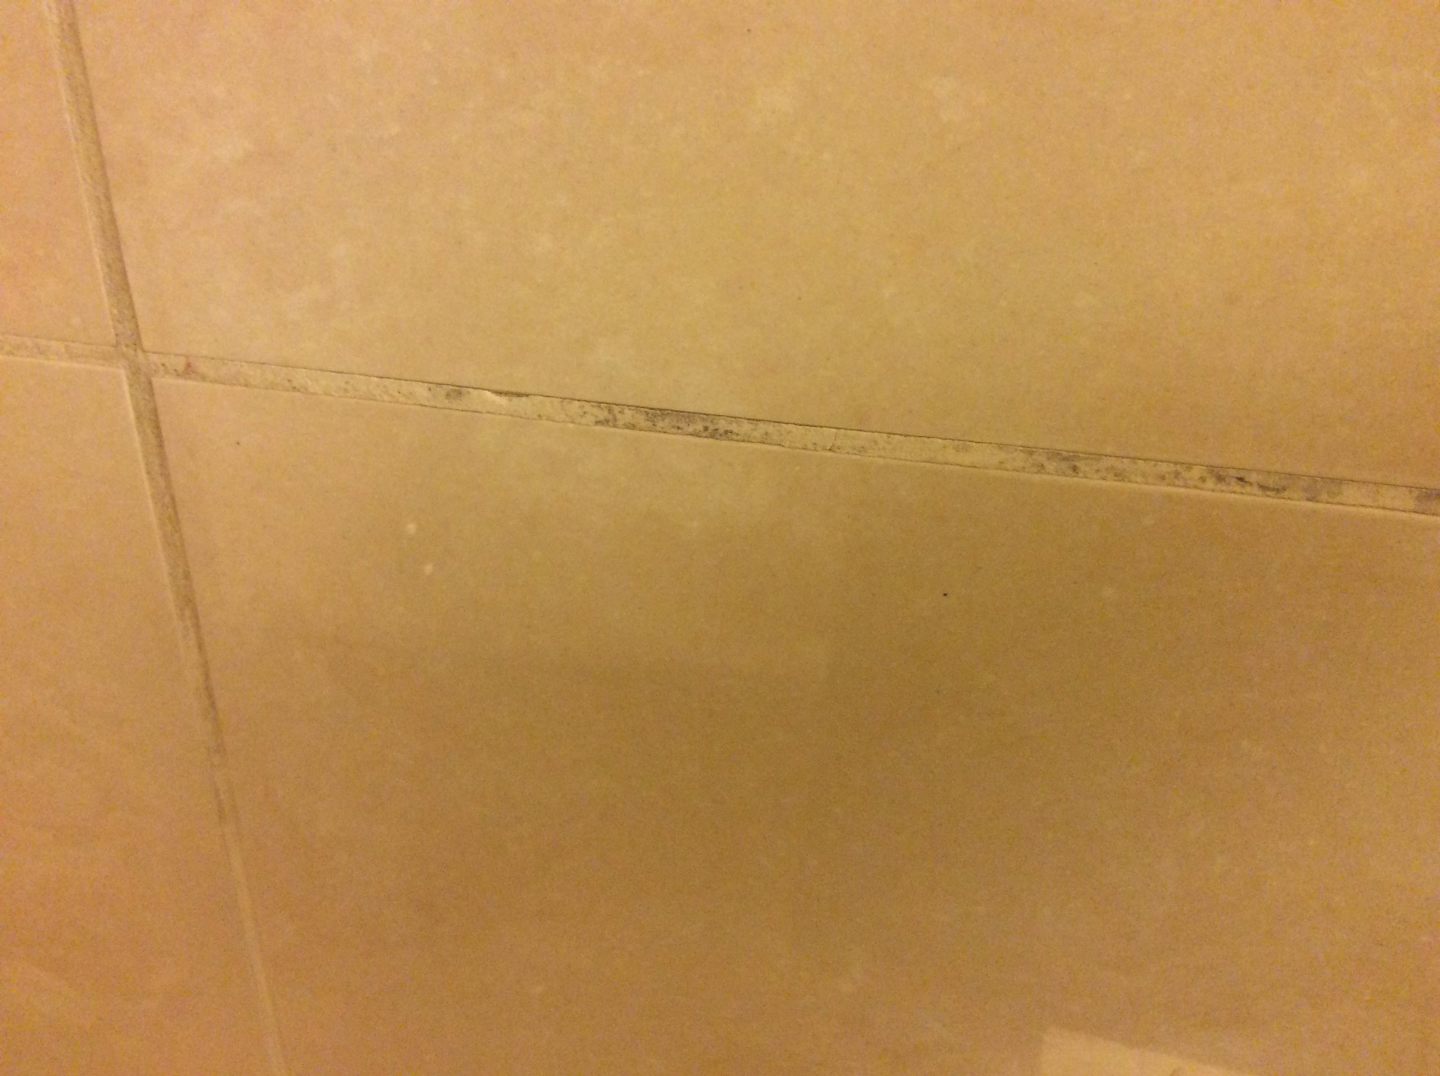 Mold still in shower after 15 days of cleaning